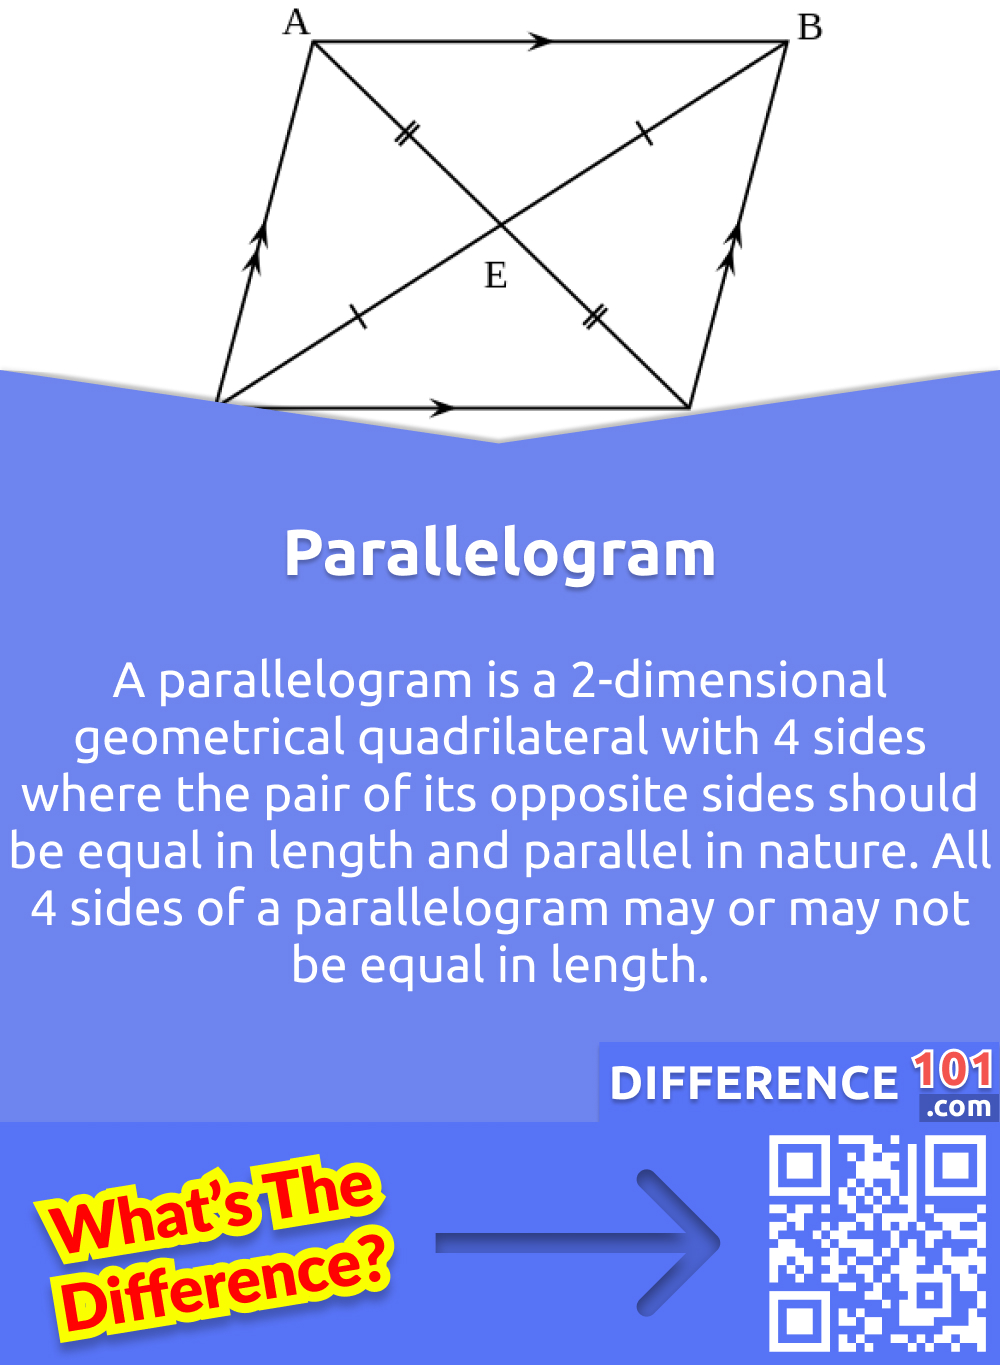 What is Parallelogram? A parallelogram is a 2-dimensional geometrical quadrilateral with 4 sides where the pair of its opposite sides should be equal in length and parallel in nature. All 4 sides of a parallelogram may or may not be equal in length.